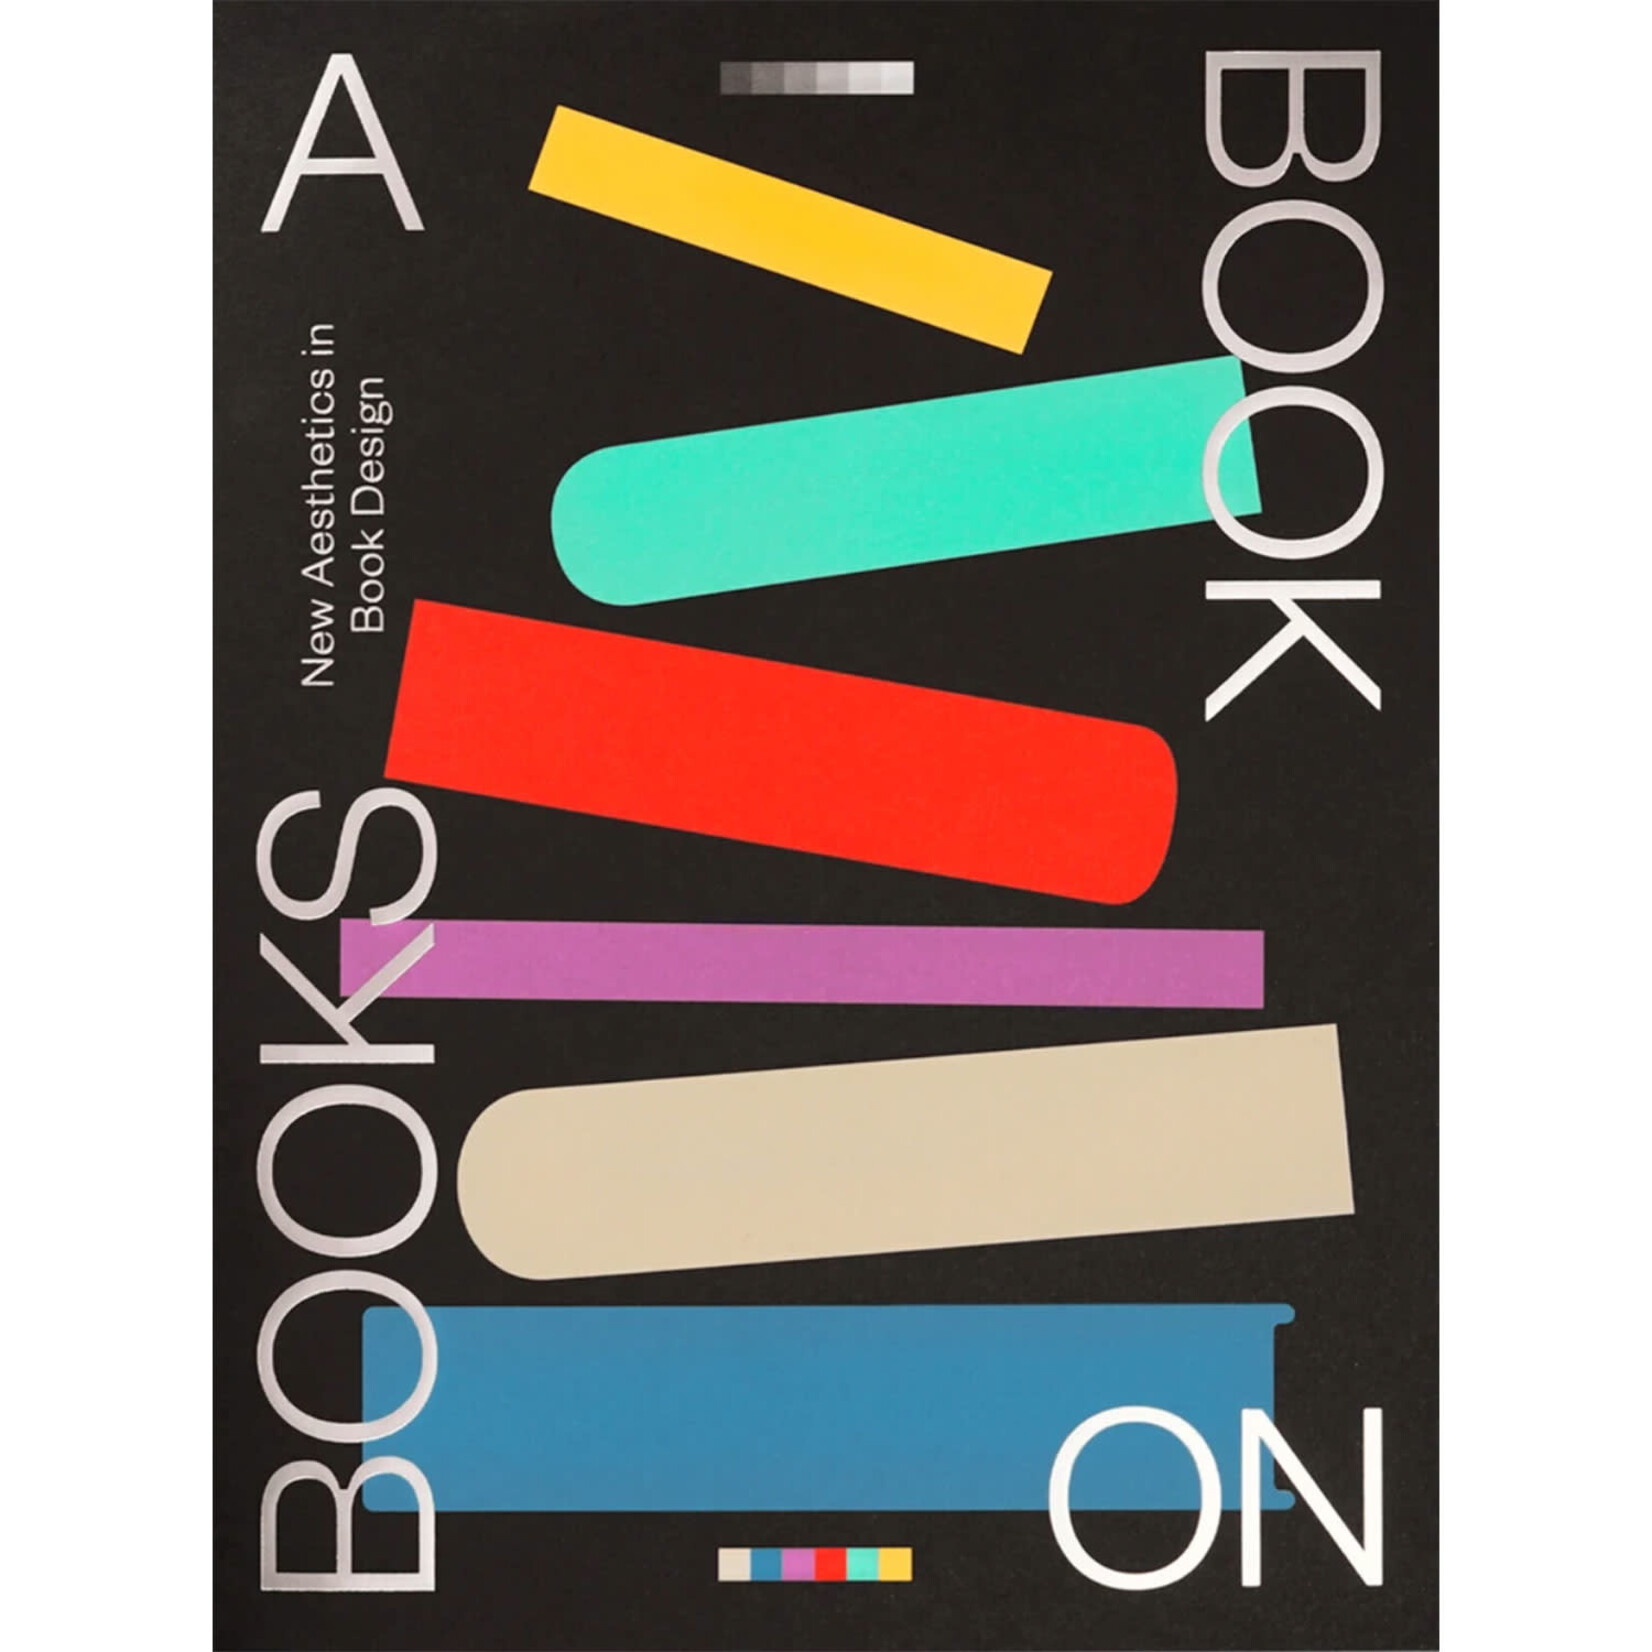 A Book on Books - Celebrating the Art of Book Design Today